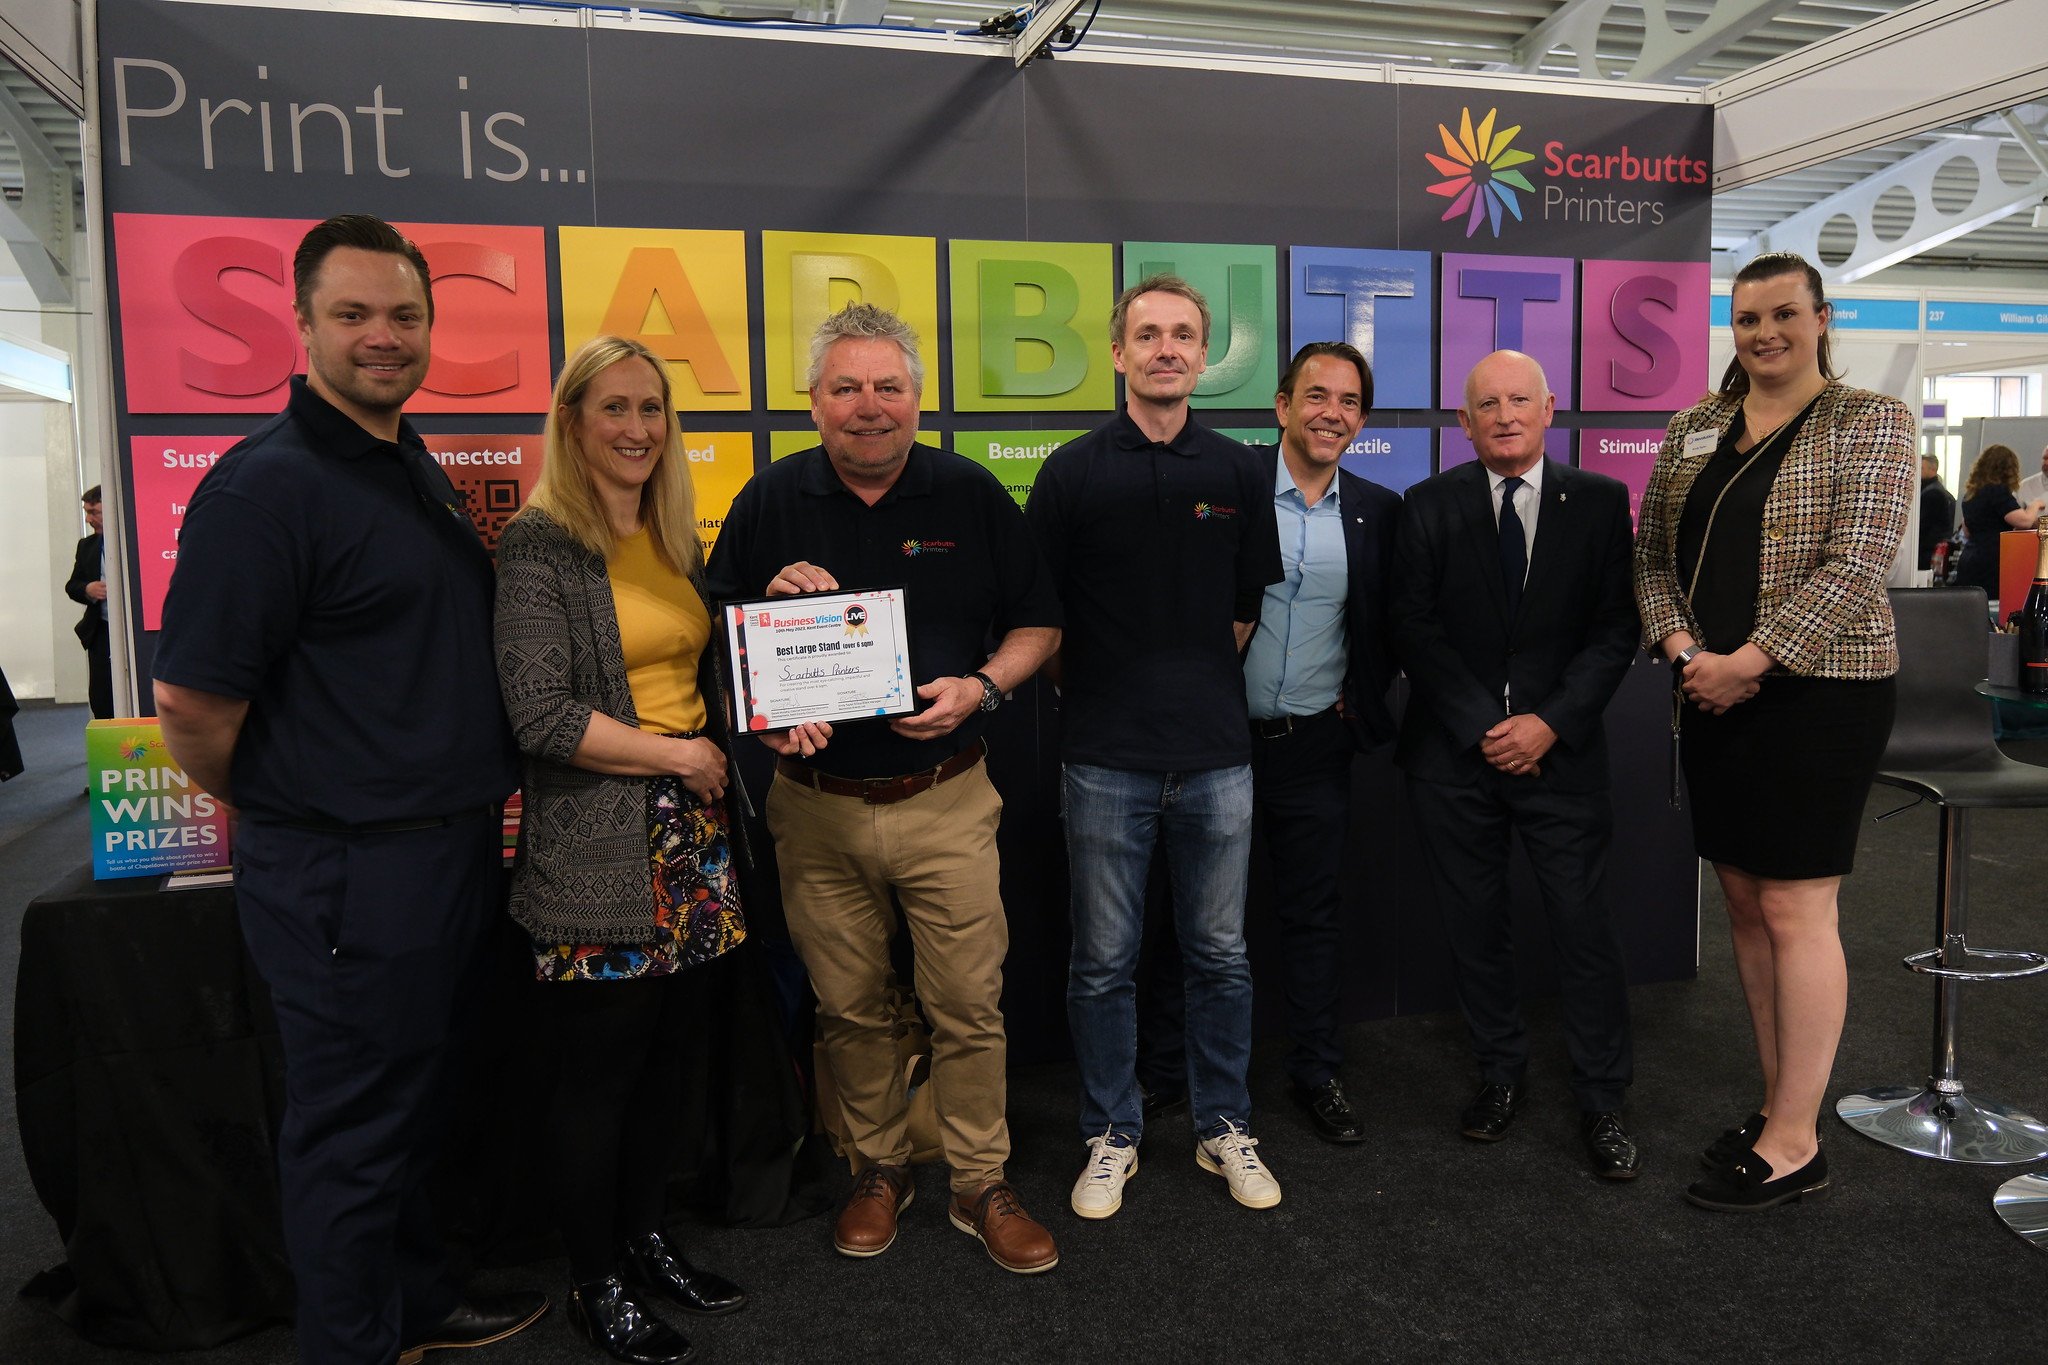 The Scarbutts Printers team at Business Vision Live 2023 with the award for Best Large Stand